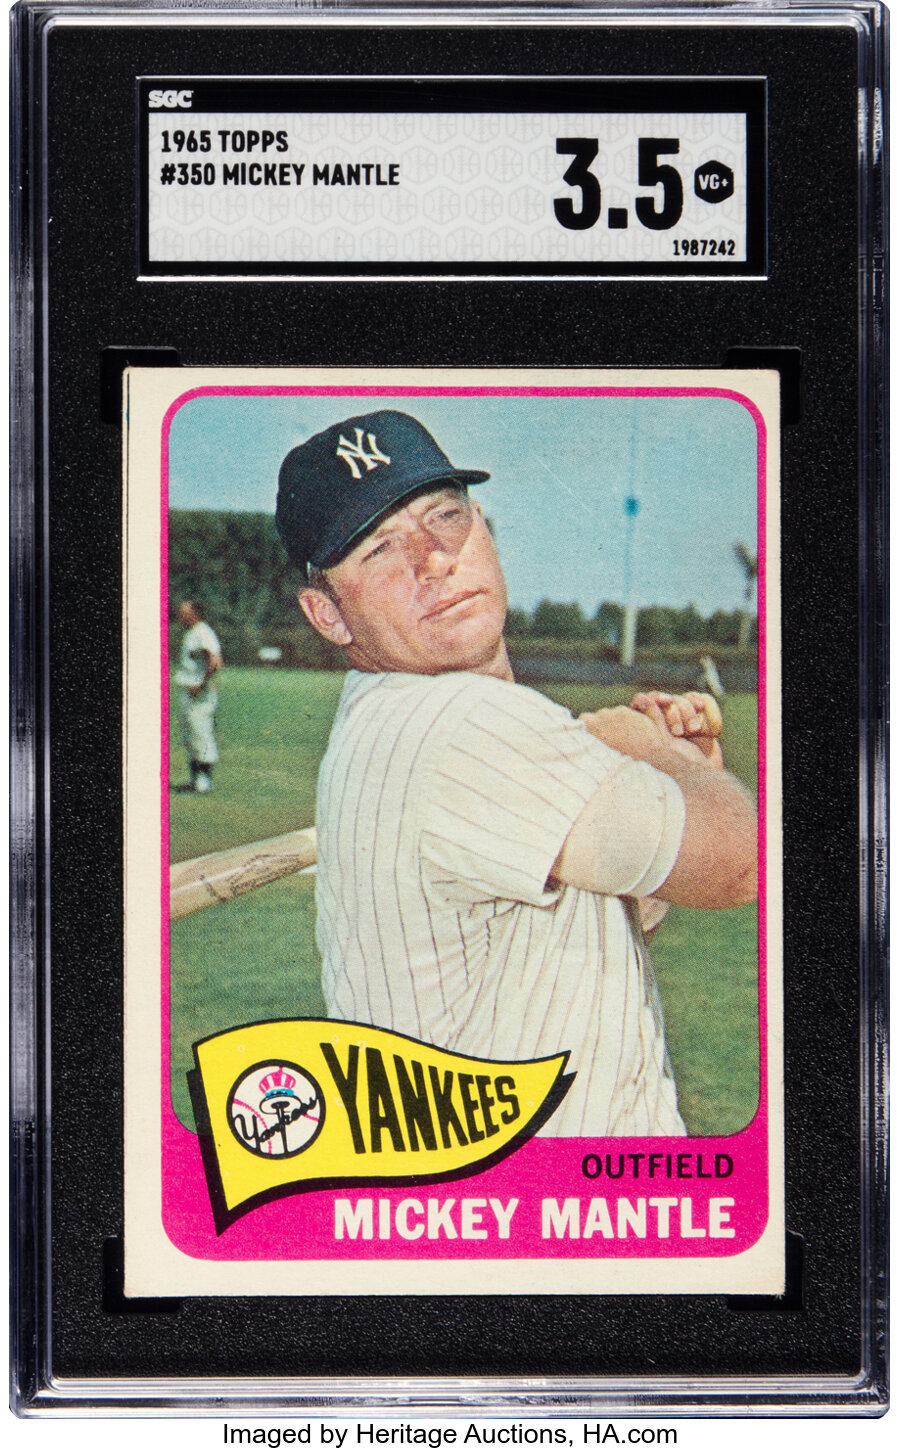 1965 Topps Mickey Mantle #350 SGC VG+ 3.5